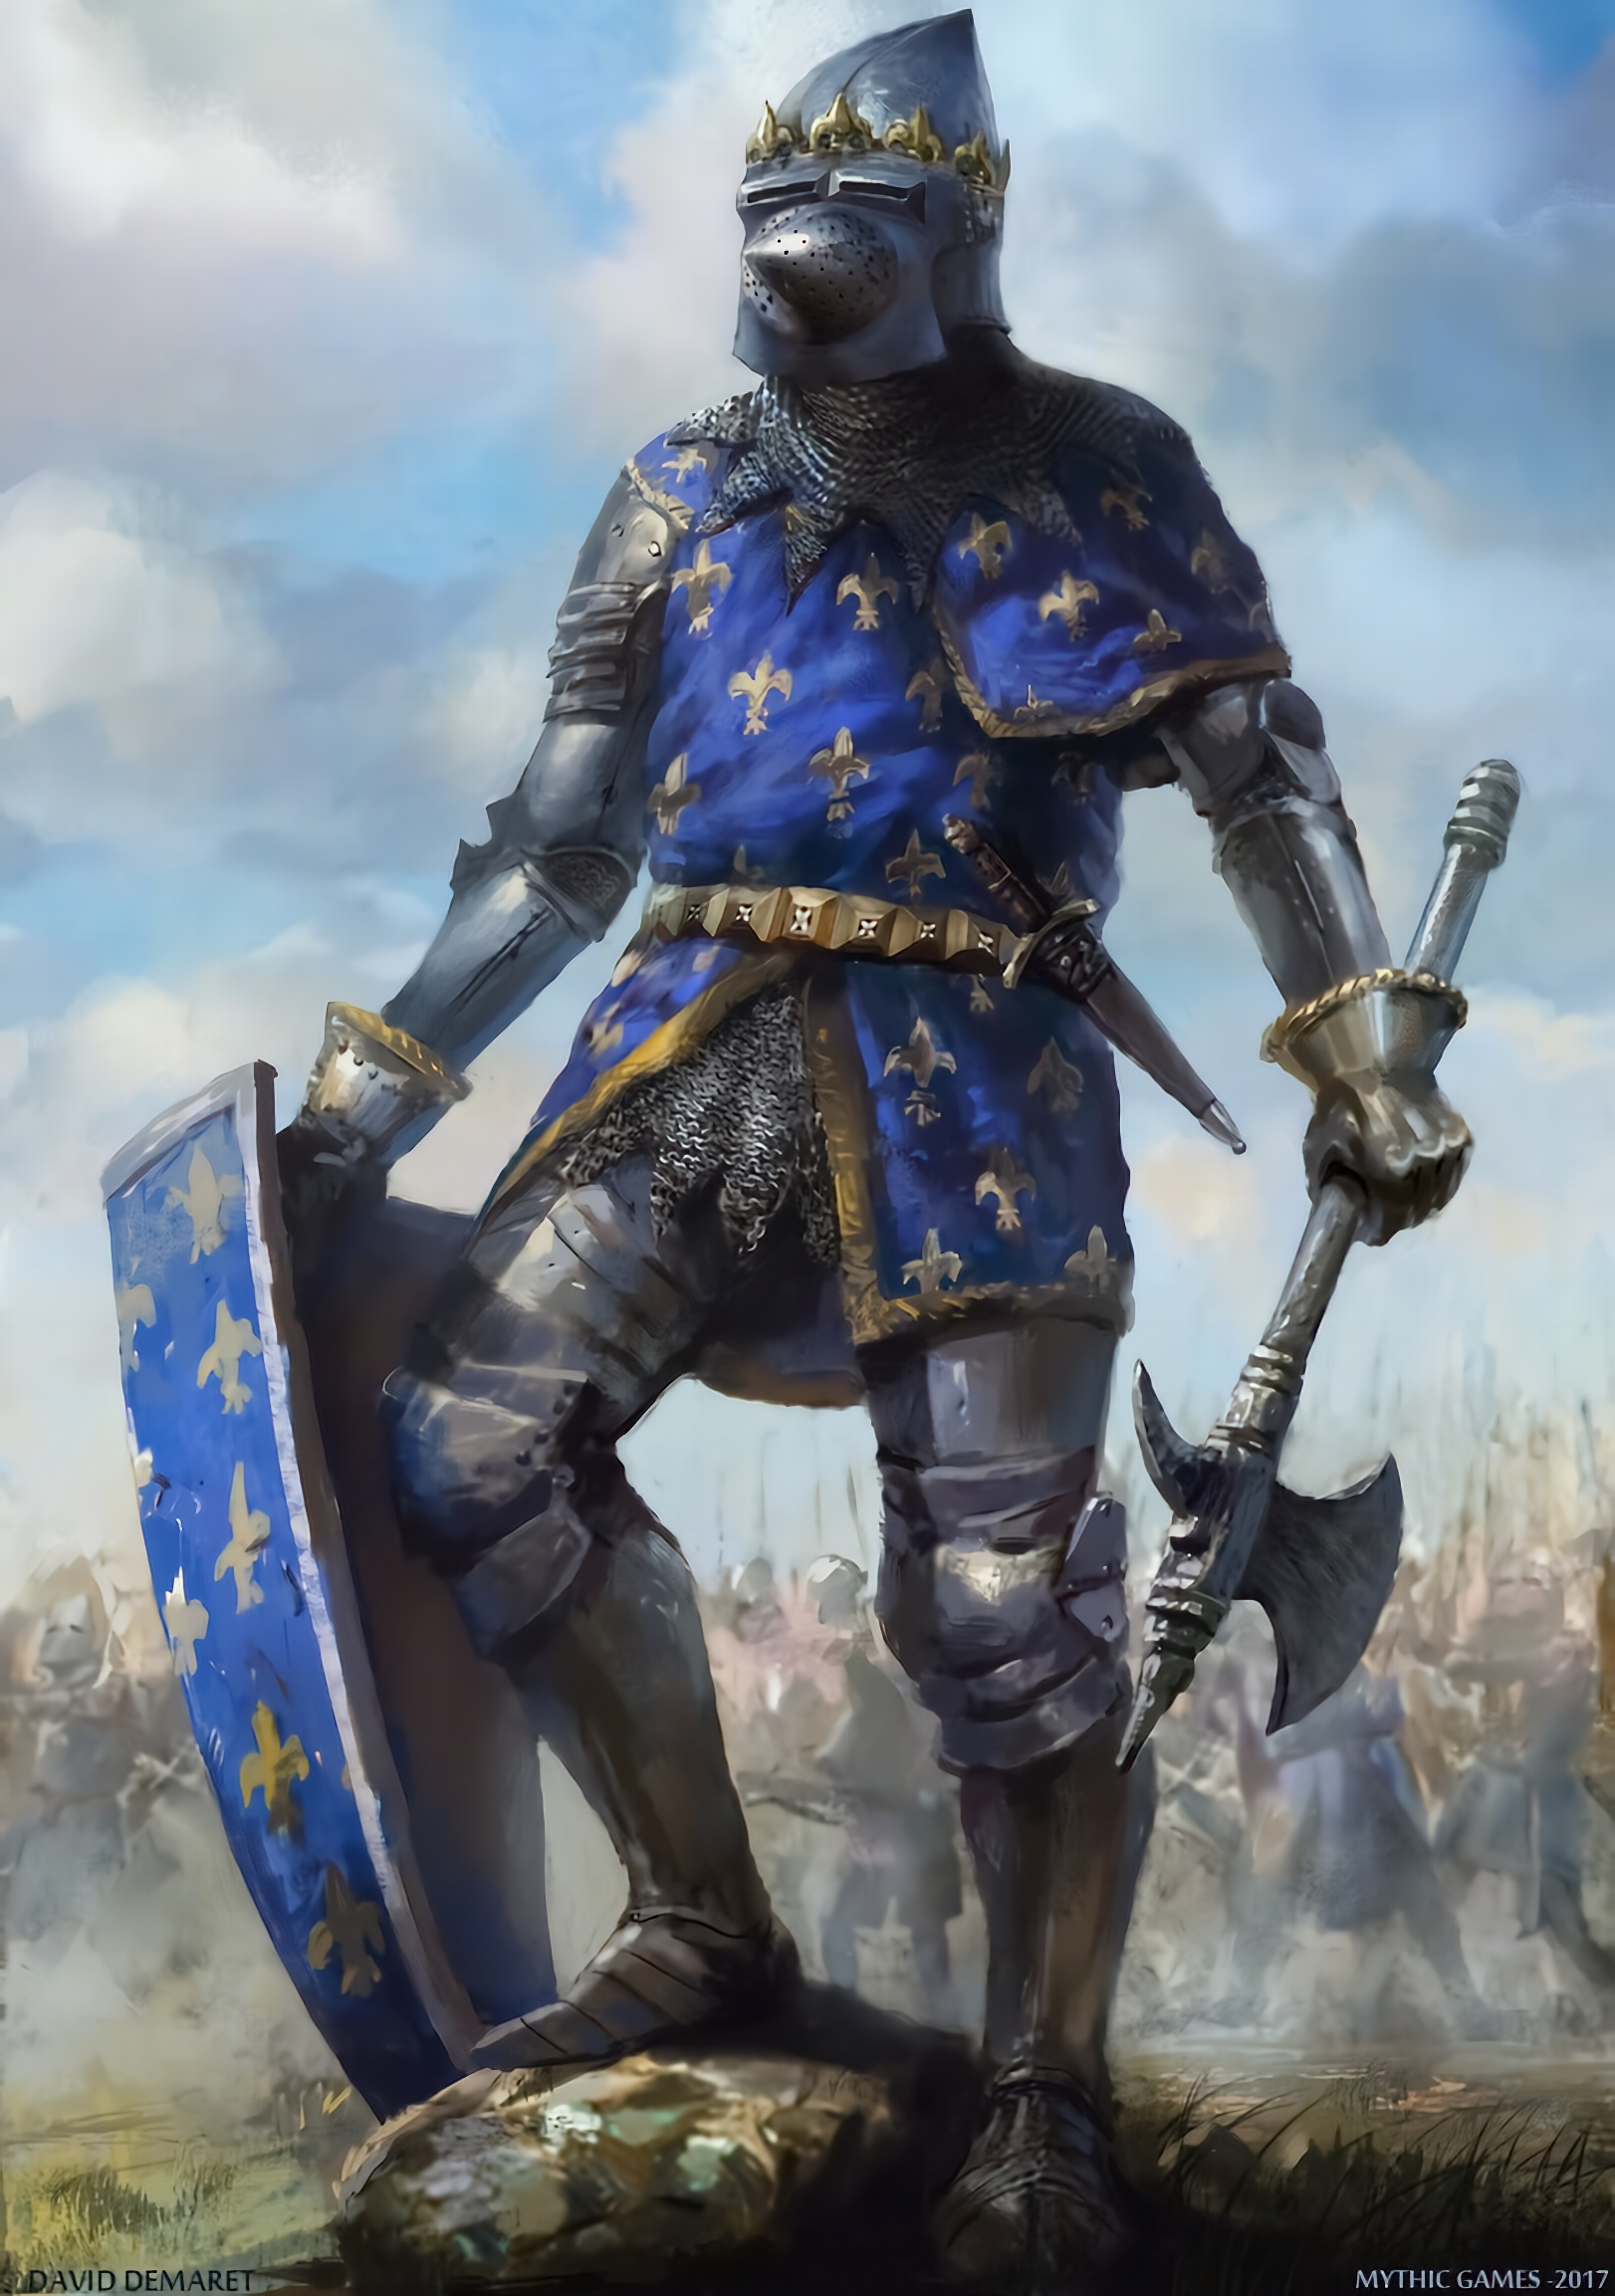 General 1622x2306 fantasy art middle ages knight weapon digital art portrait display armor watermarked 2017 (Year) David Demaret clouds sky axes shield